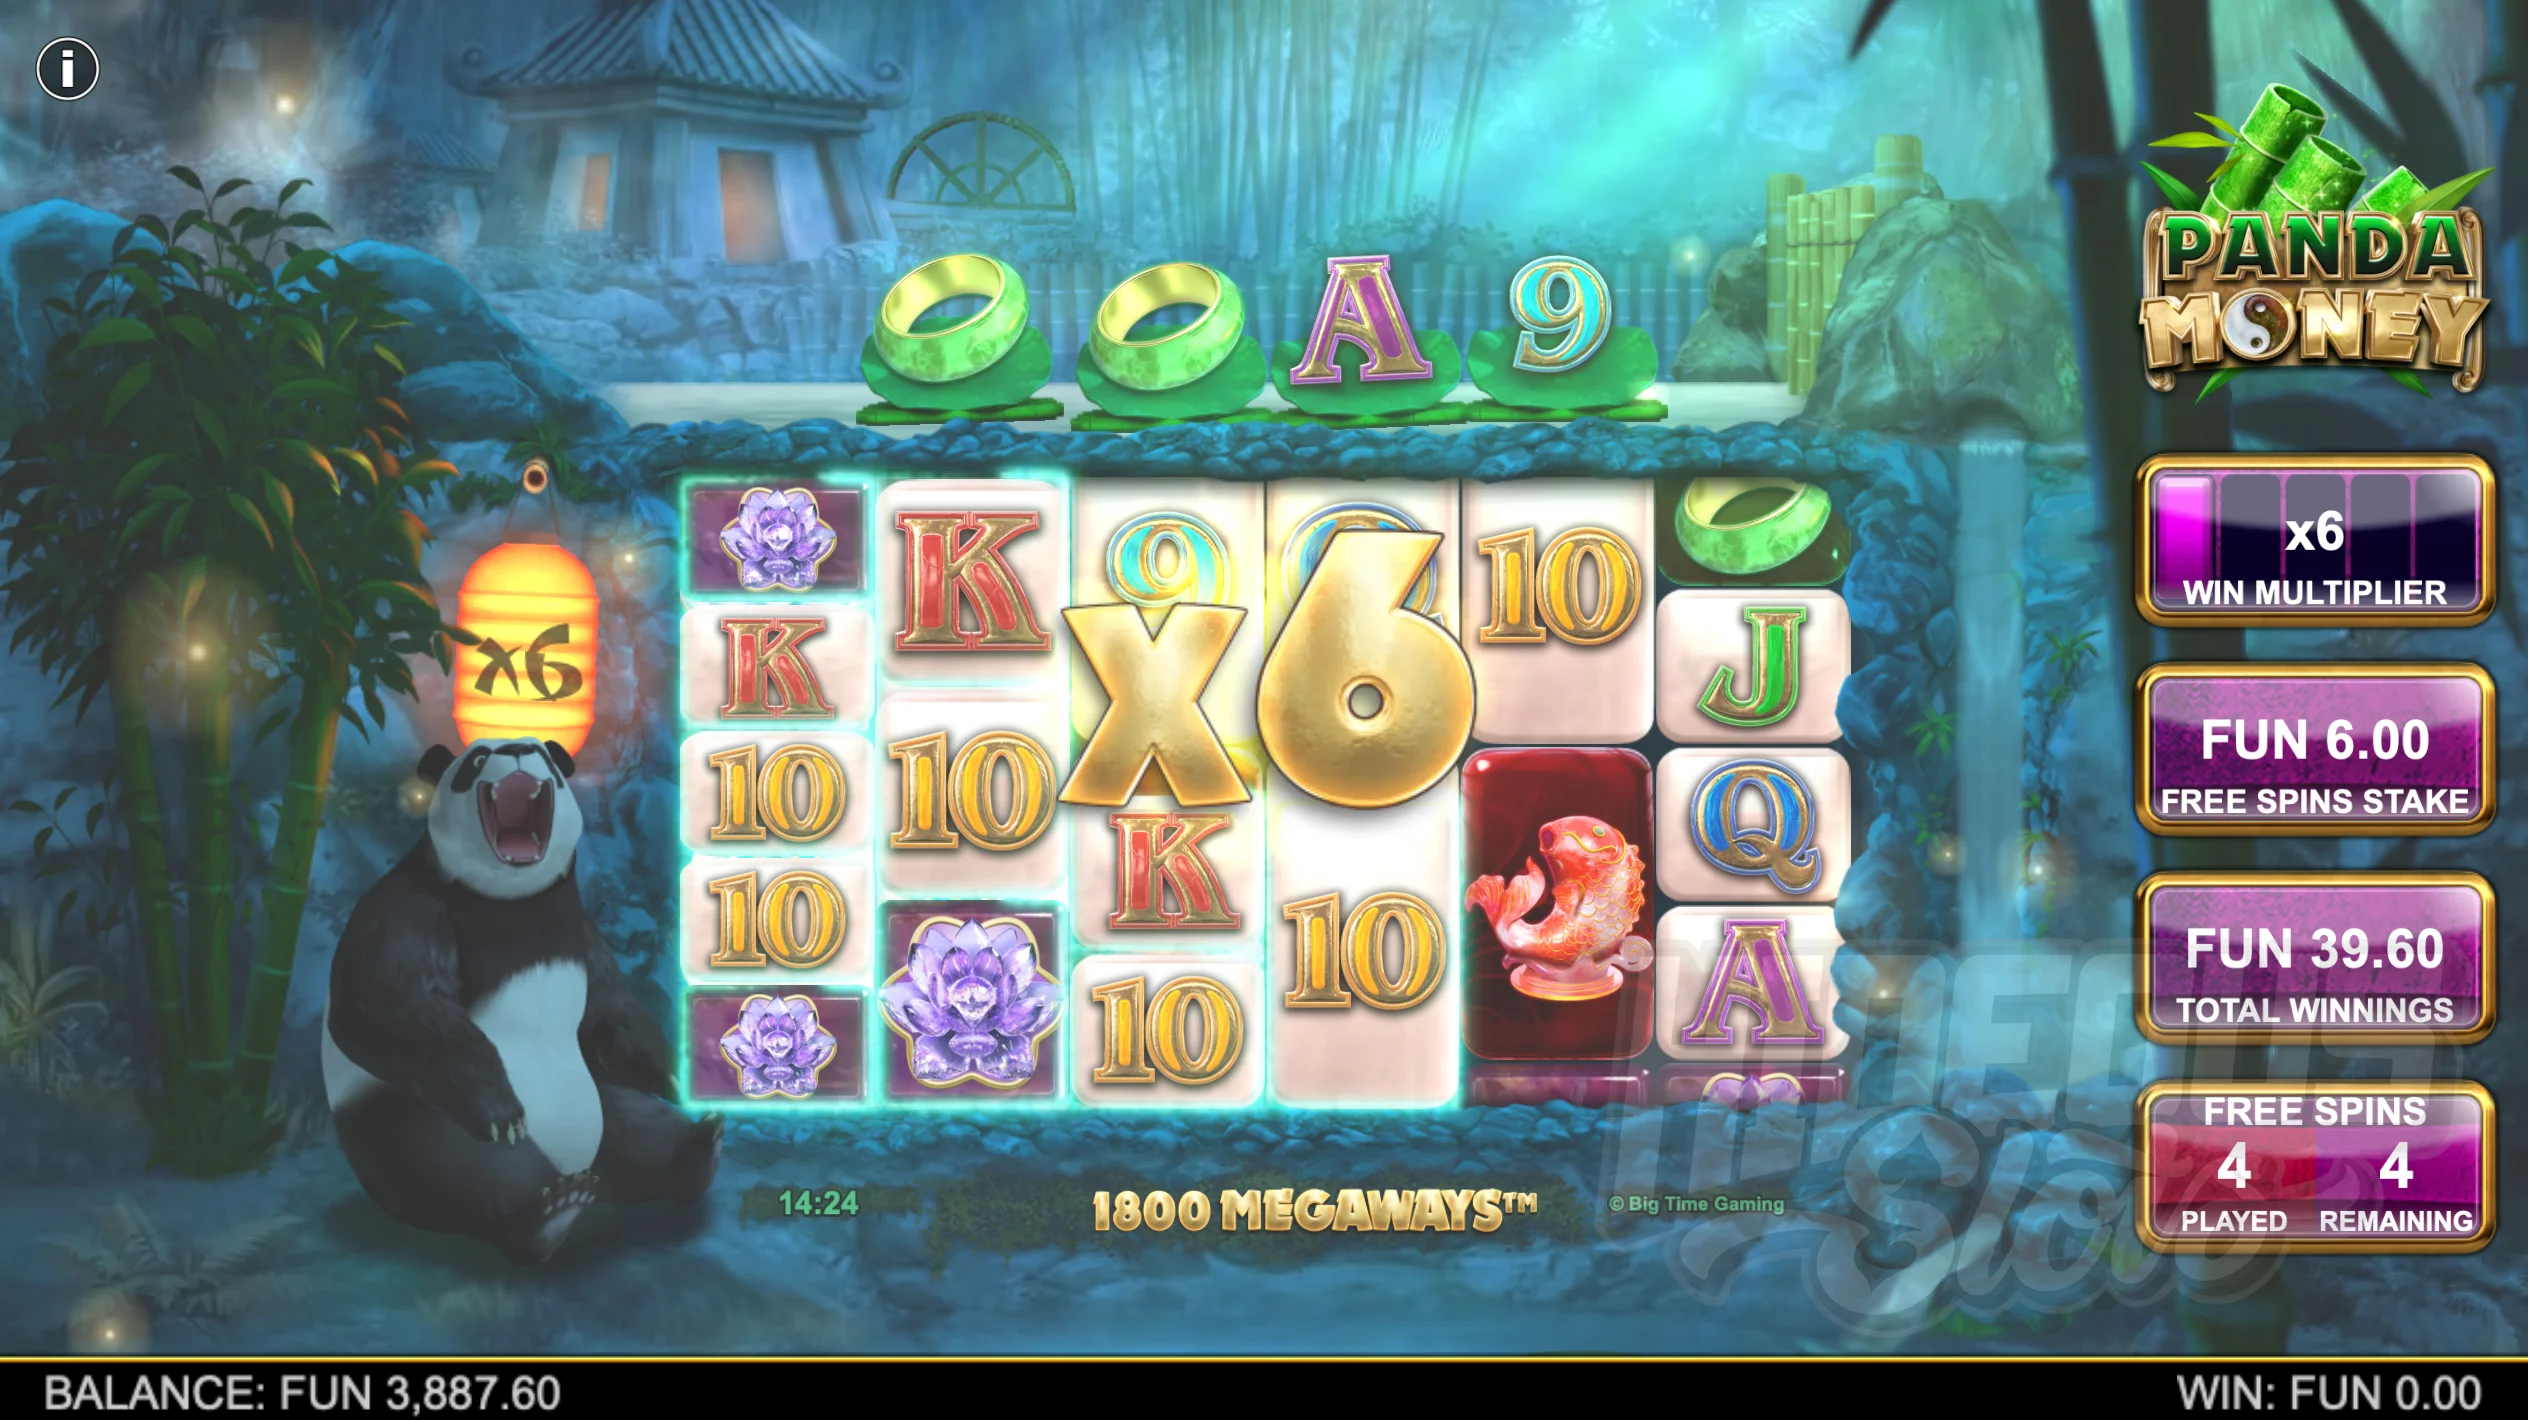 For Every 5 Bamboo Symbols, the Win Multiplier Increments by +1 During Free Spins